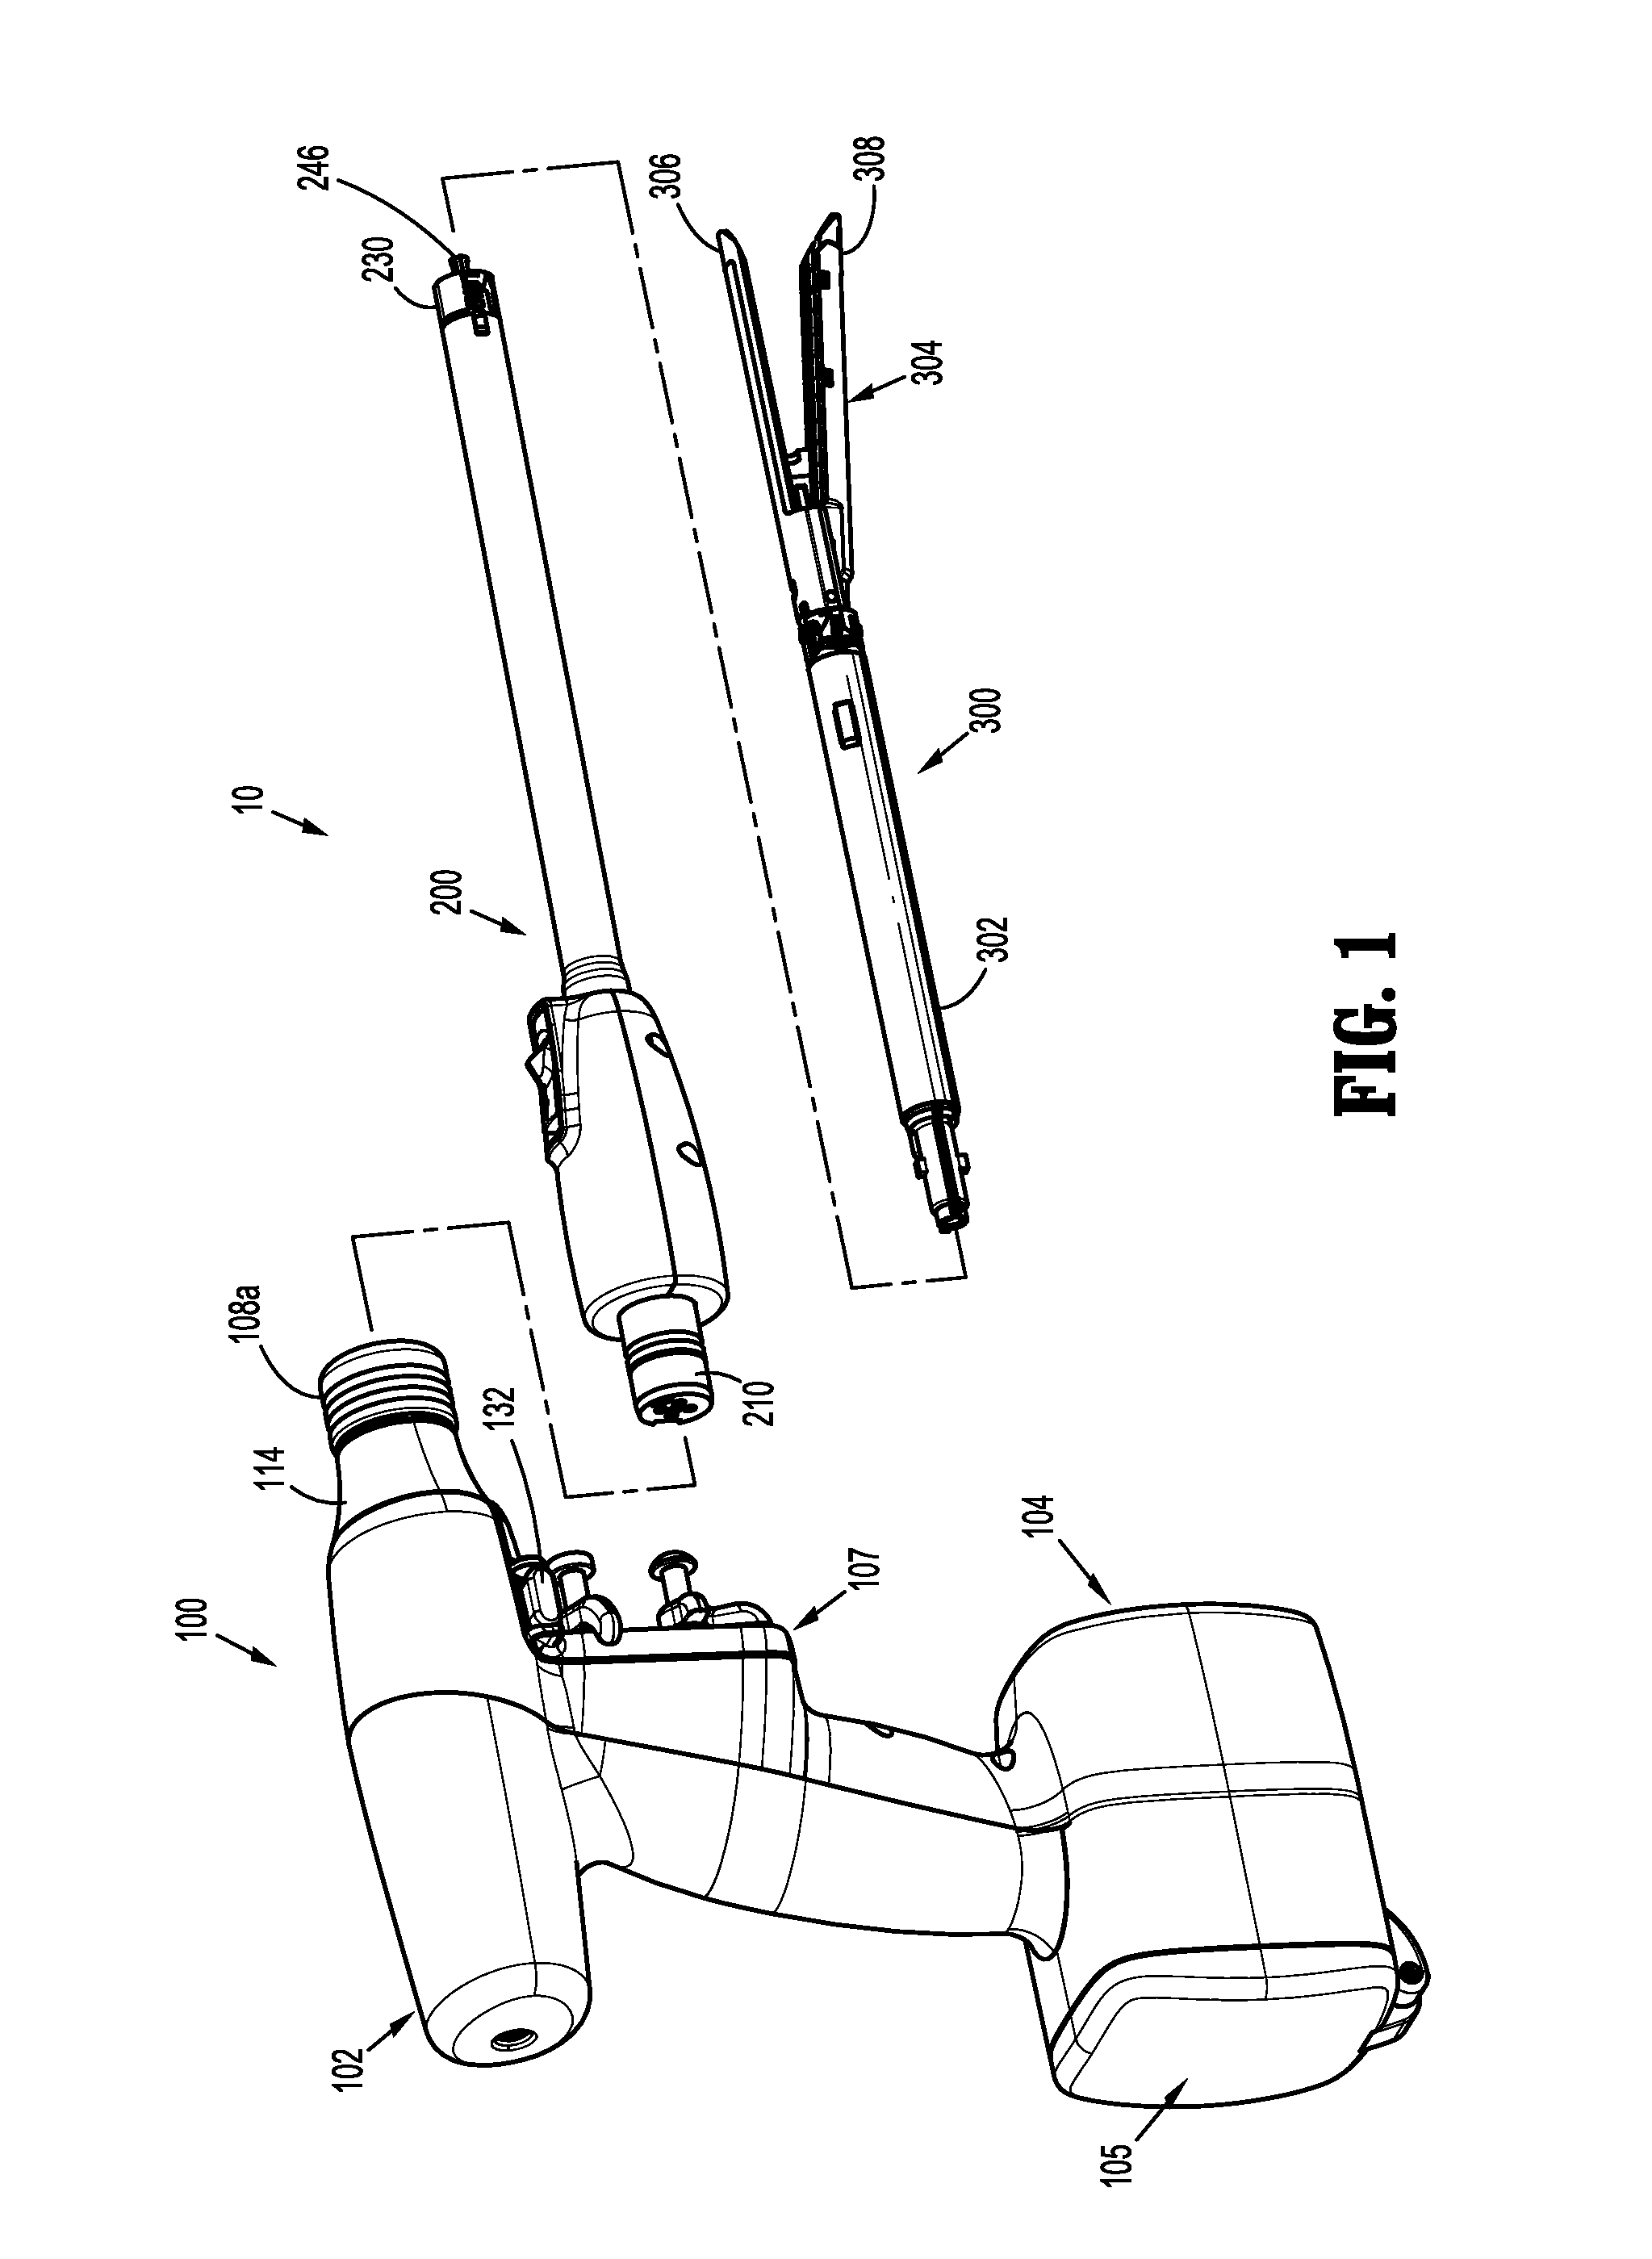 Apparatus and method for tissue thickness sensing